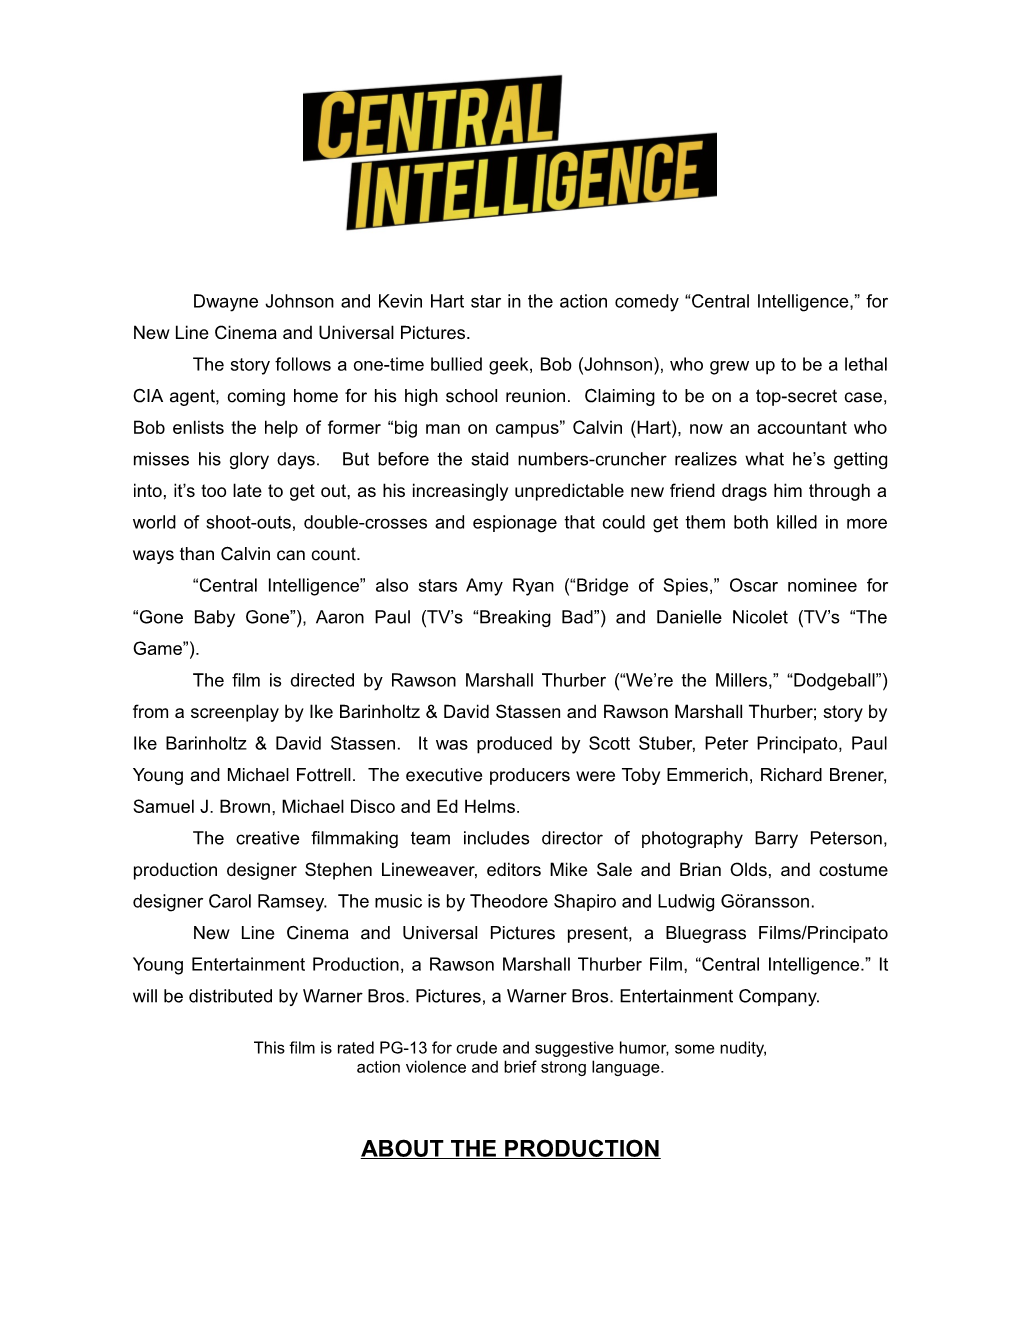 Dwayne Johnson and Kevin Hart Star in the Action Comedy Central Intelligence, for New Line